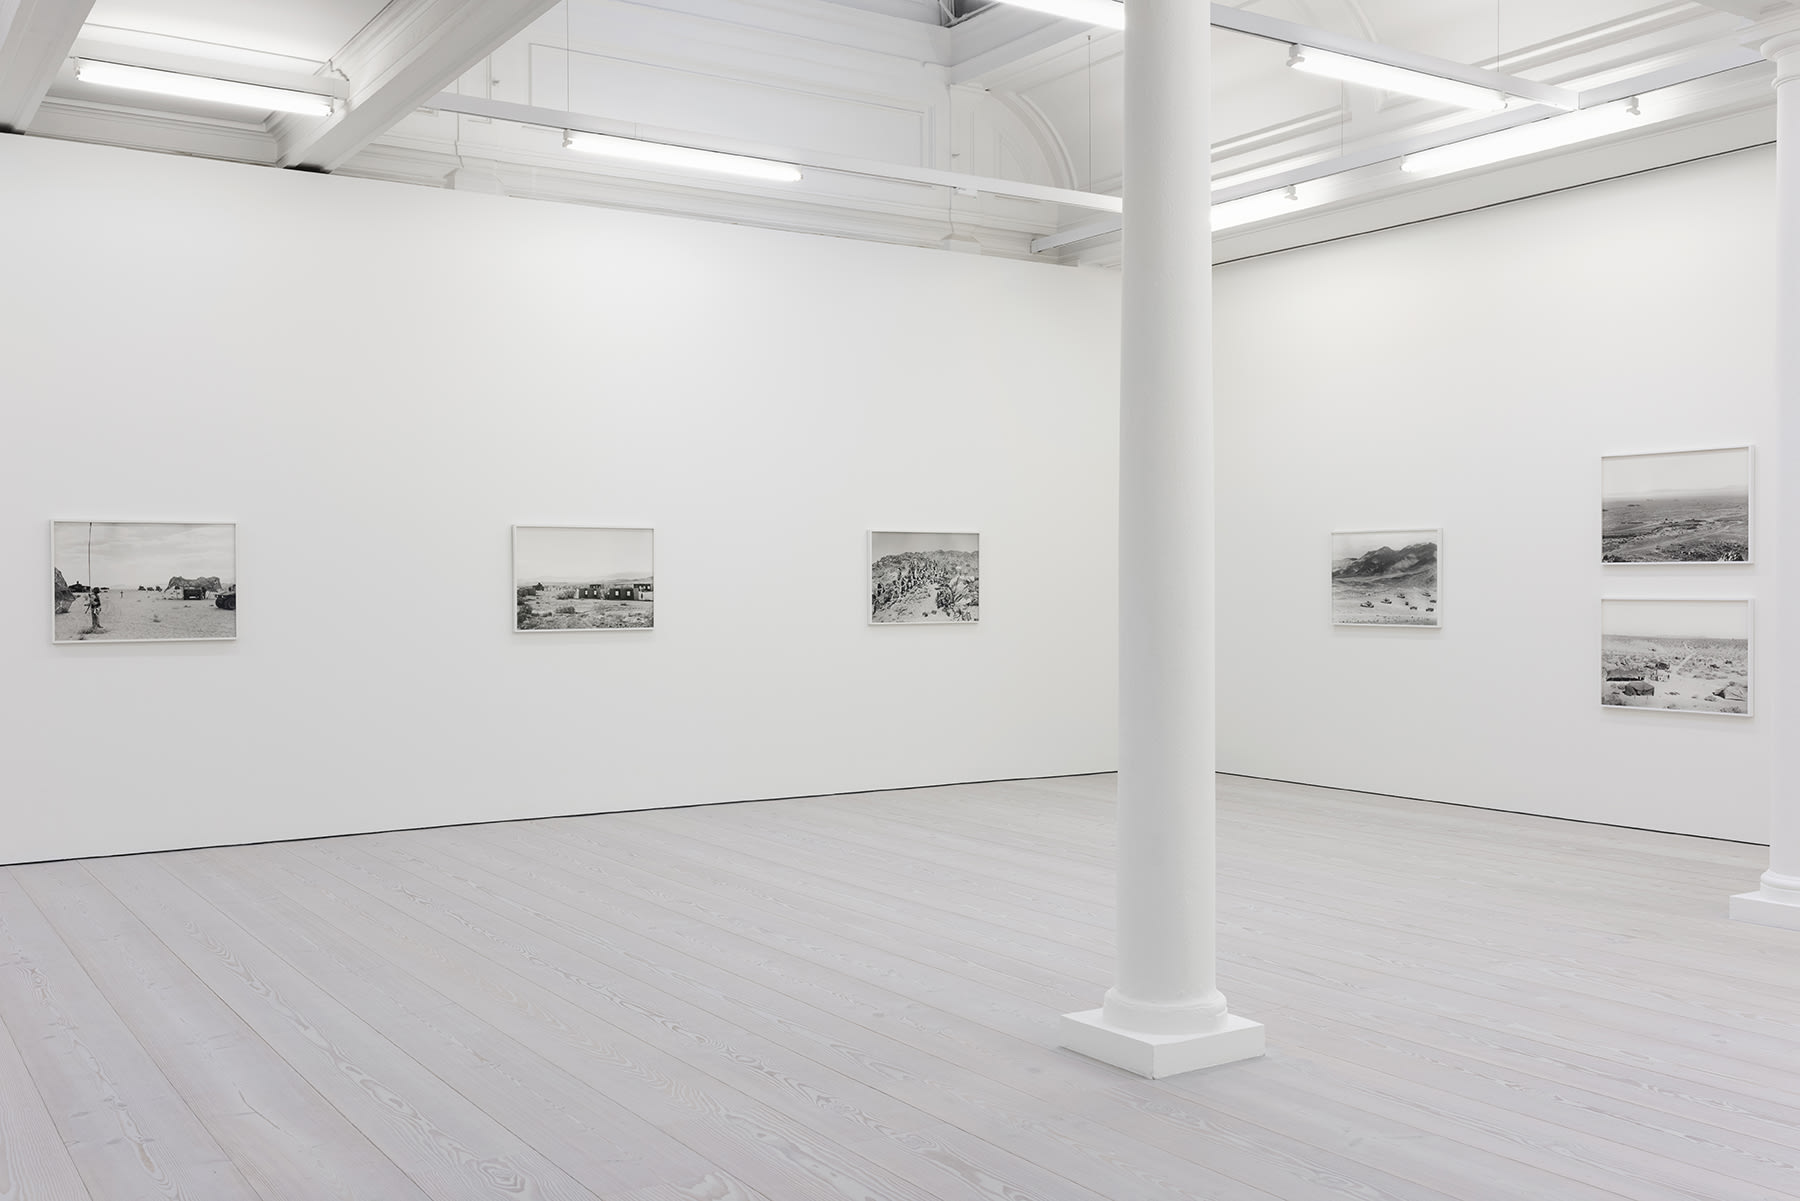 installation view of photographs by An-My Le